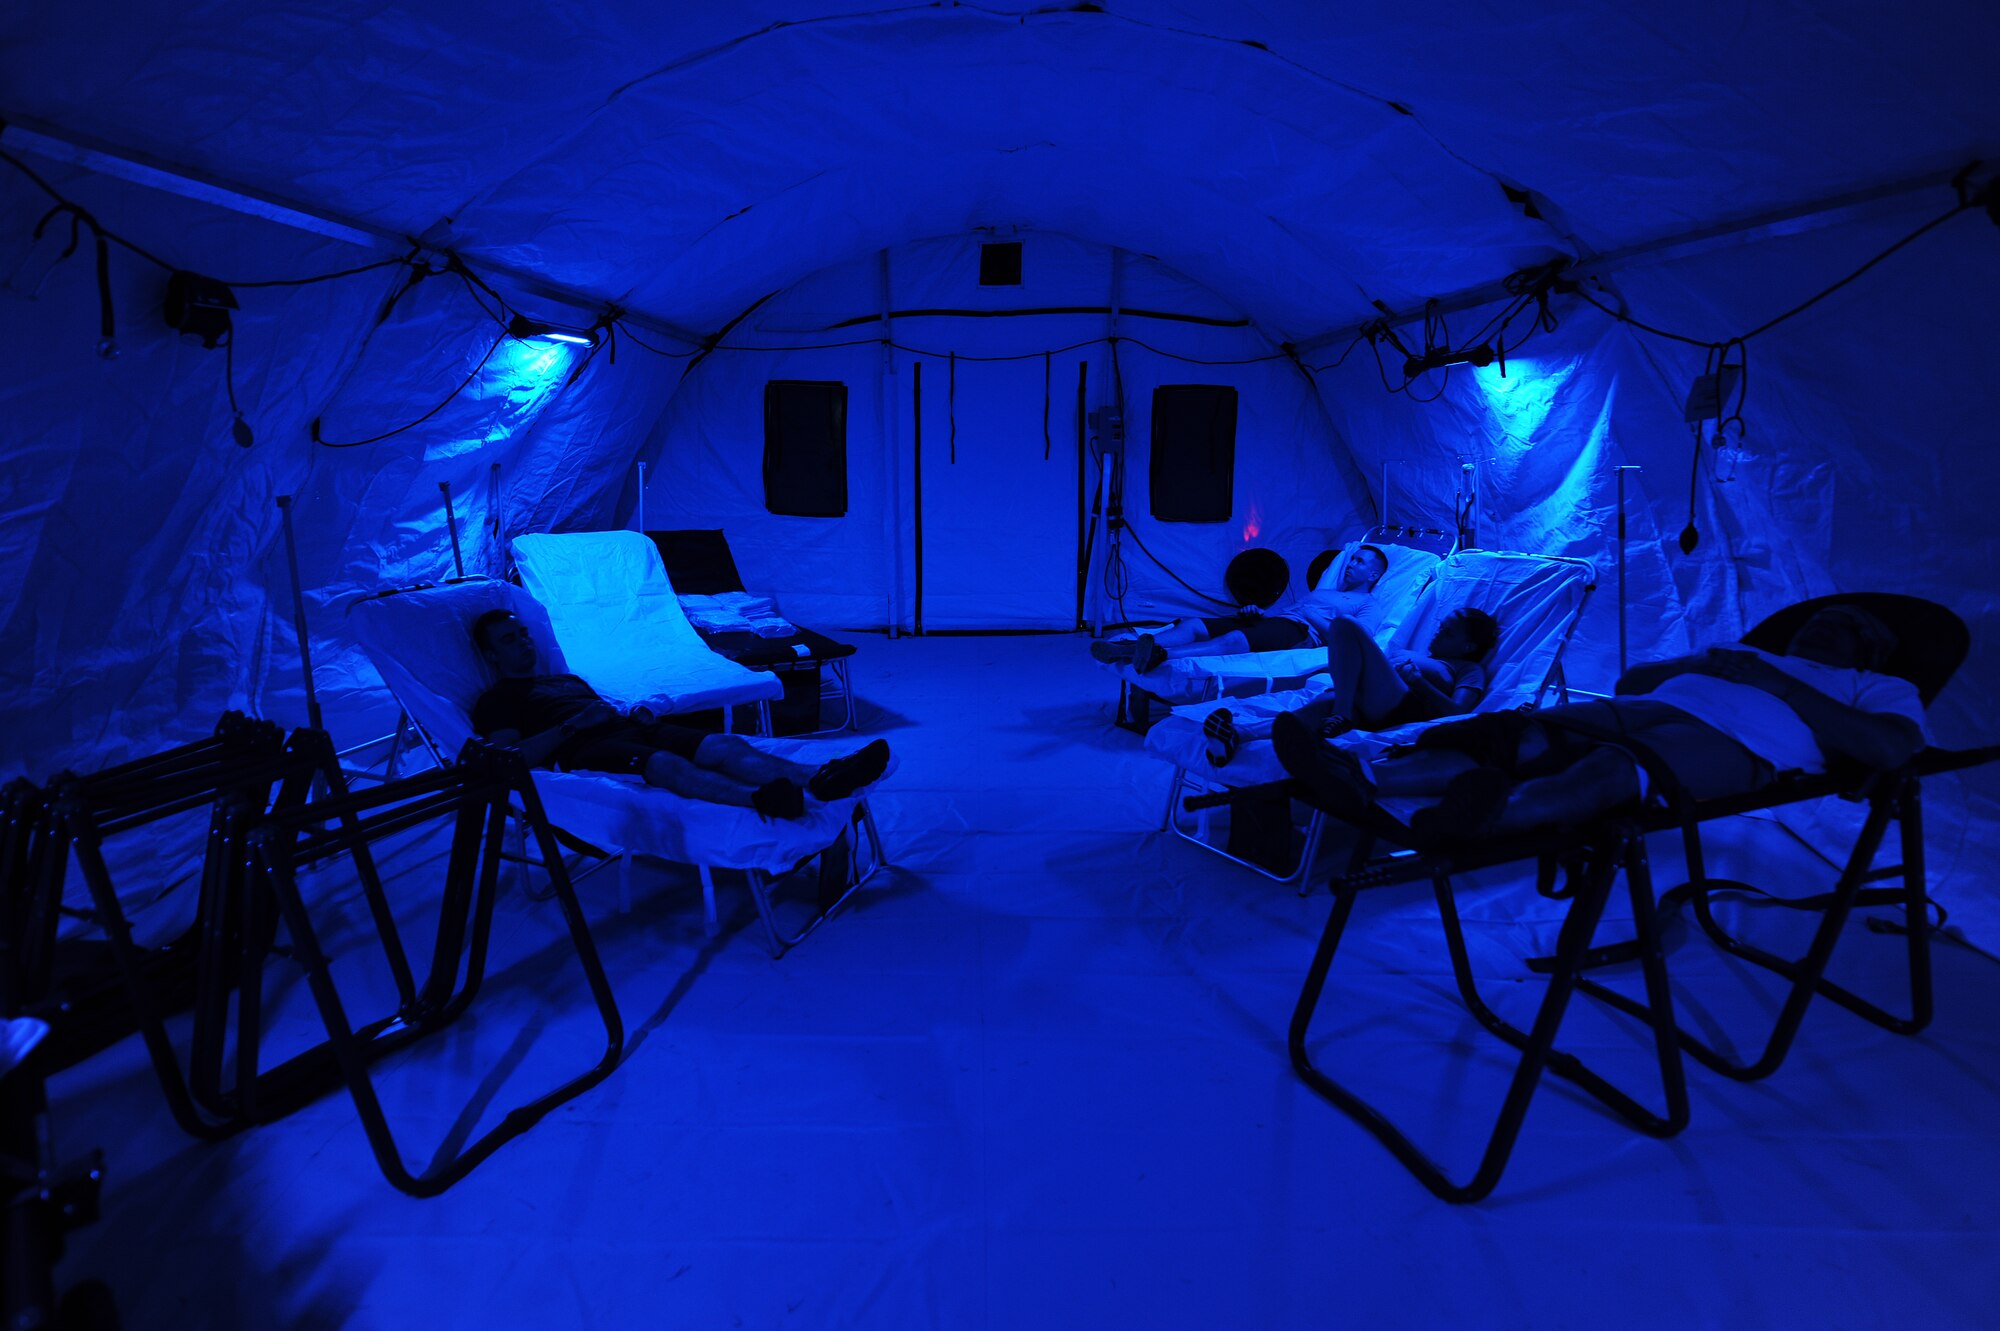 Airmen with simulated injuries rest in an En-Route Patient Staging System during an exercise on Kadena Air Base, Japan, Aug. 18, 2015. An ERPSS can be up and running in a matter of hours and is only used during times of war or other contingencies. It is a temporary facility erected to house patients and allow medical professionals to care for them before they are medically evacuated to a better-equipped facility in a safer area. (U.S. Air Force photo by Airman 1st Class Zade C. Vadnais)